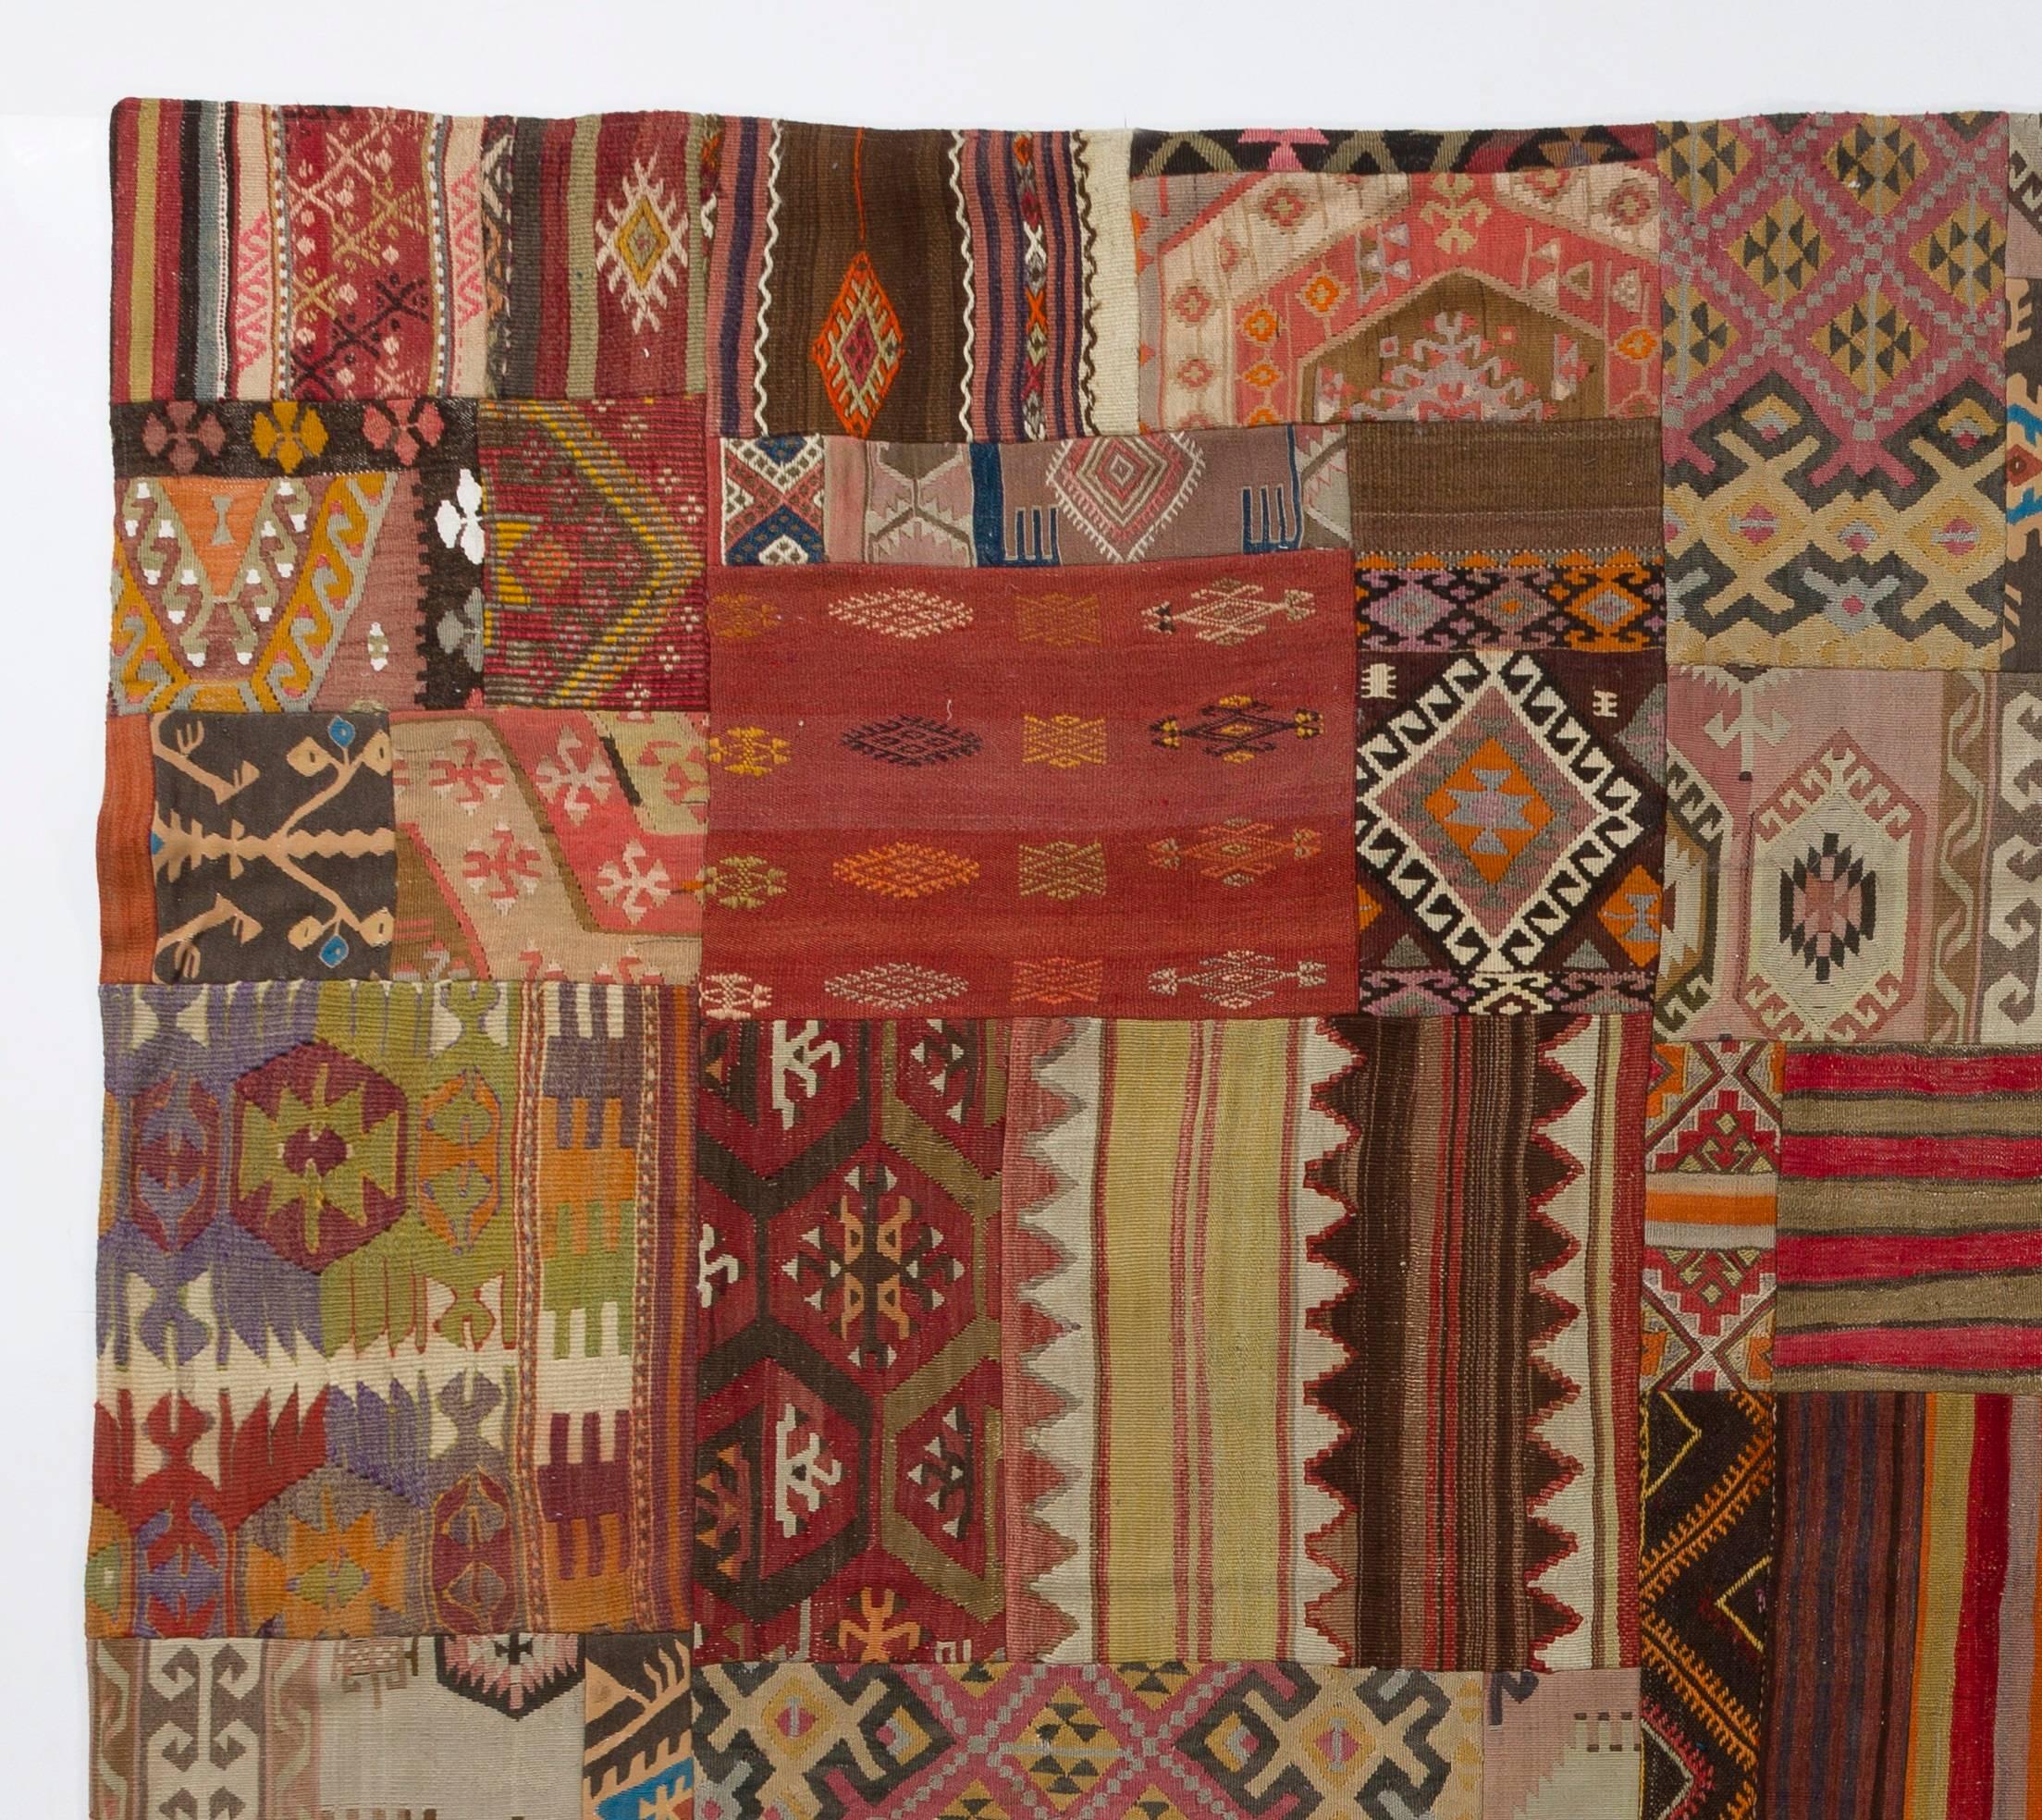 Assorted pieces of mid to early 20th century woolen Kilims (flat-weave rugs) were washed then stitched together by hand in couple of weeks to create this beautiful one of a kind patchwork rug. A durable dark color cotton twill is sewn on the reverse